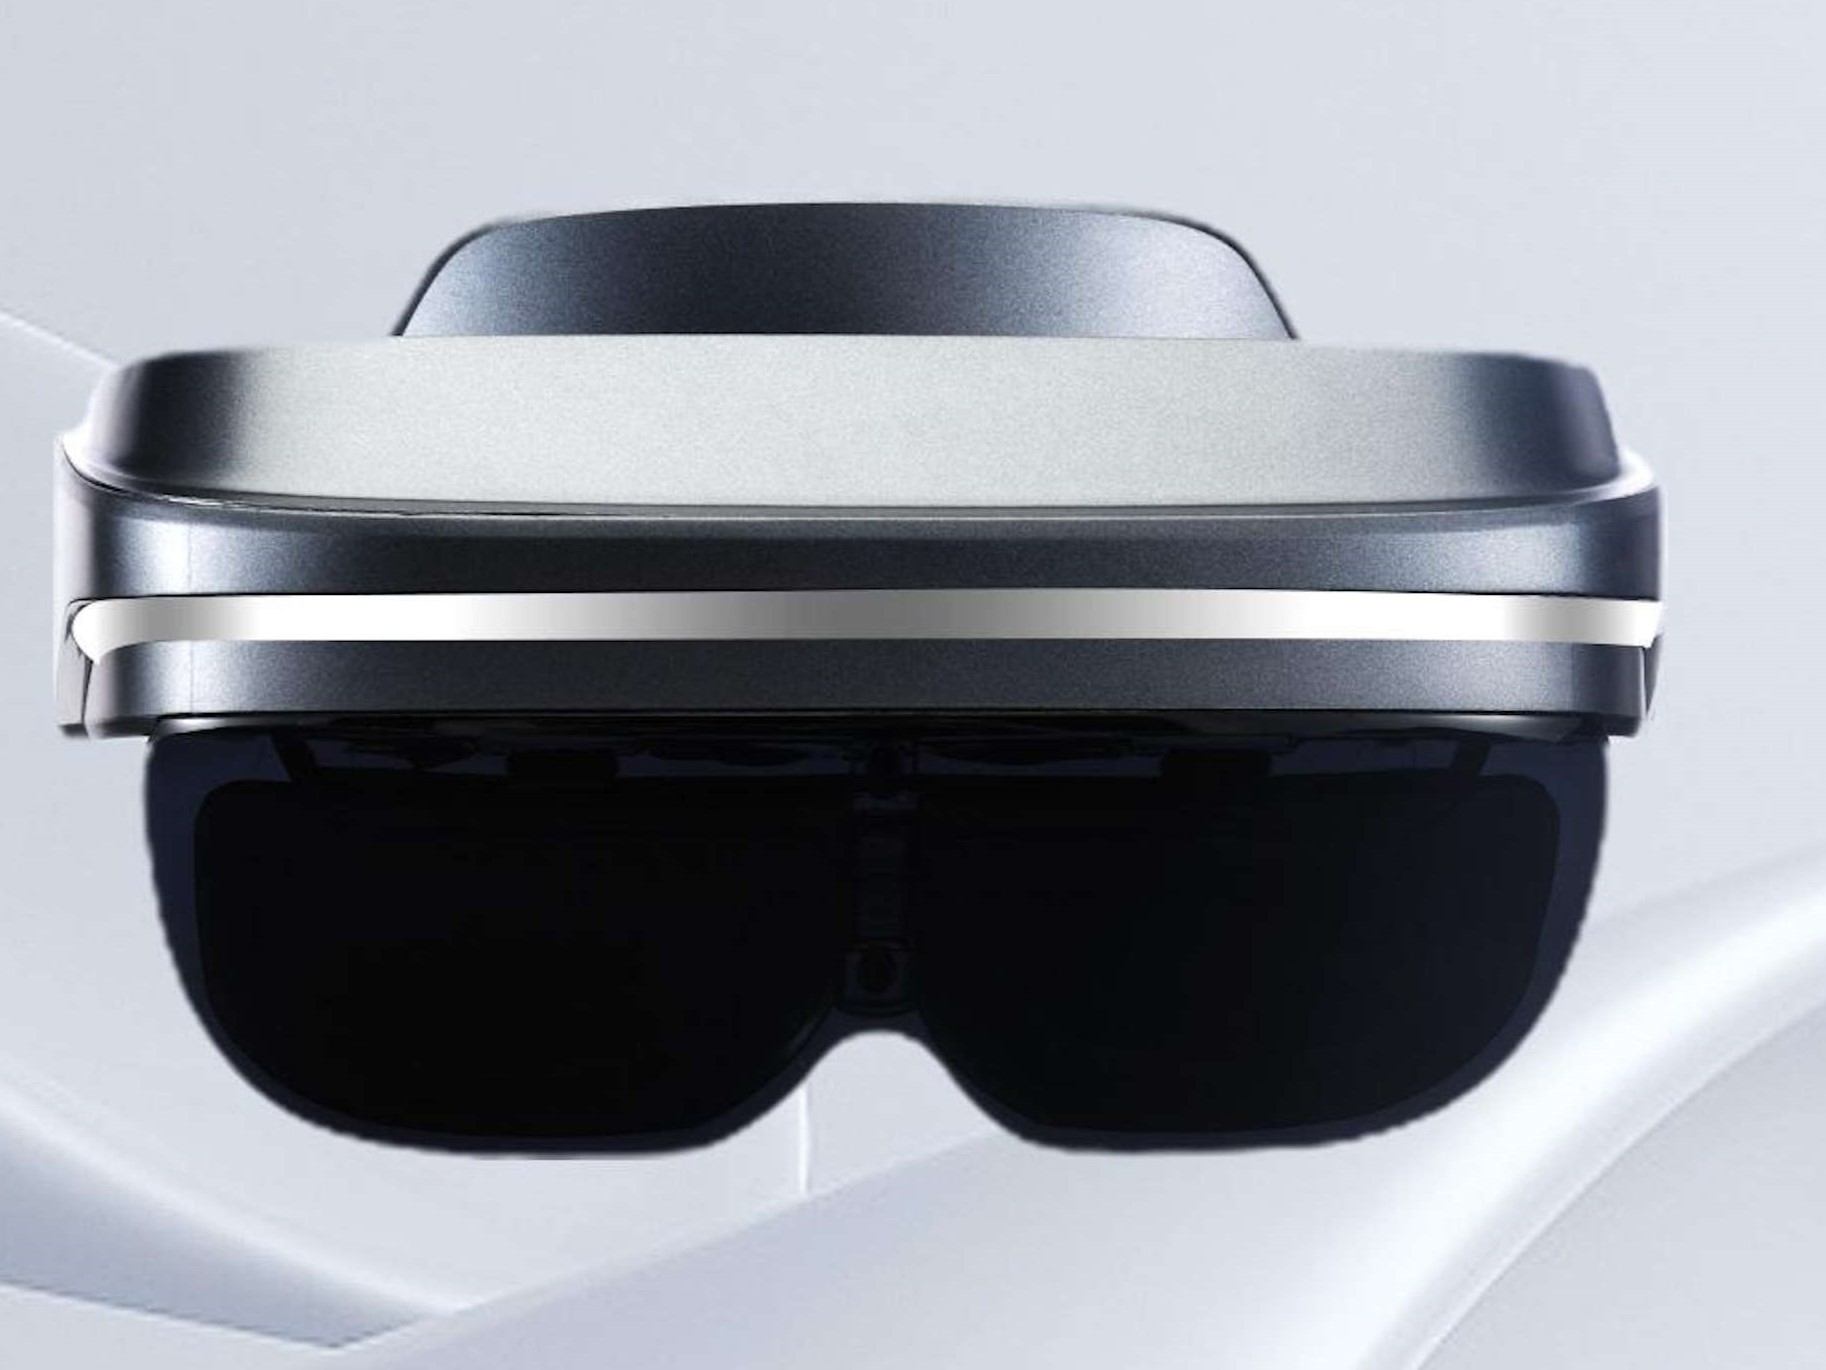 Dream GlassLead SE: New VR headset for video games and media playback on the go